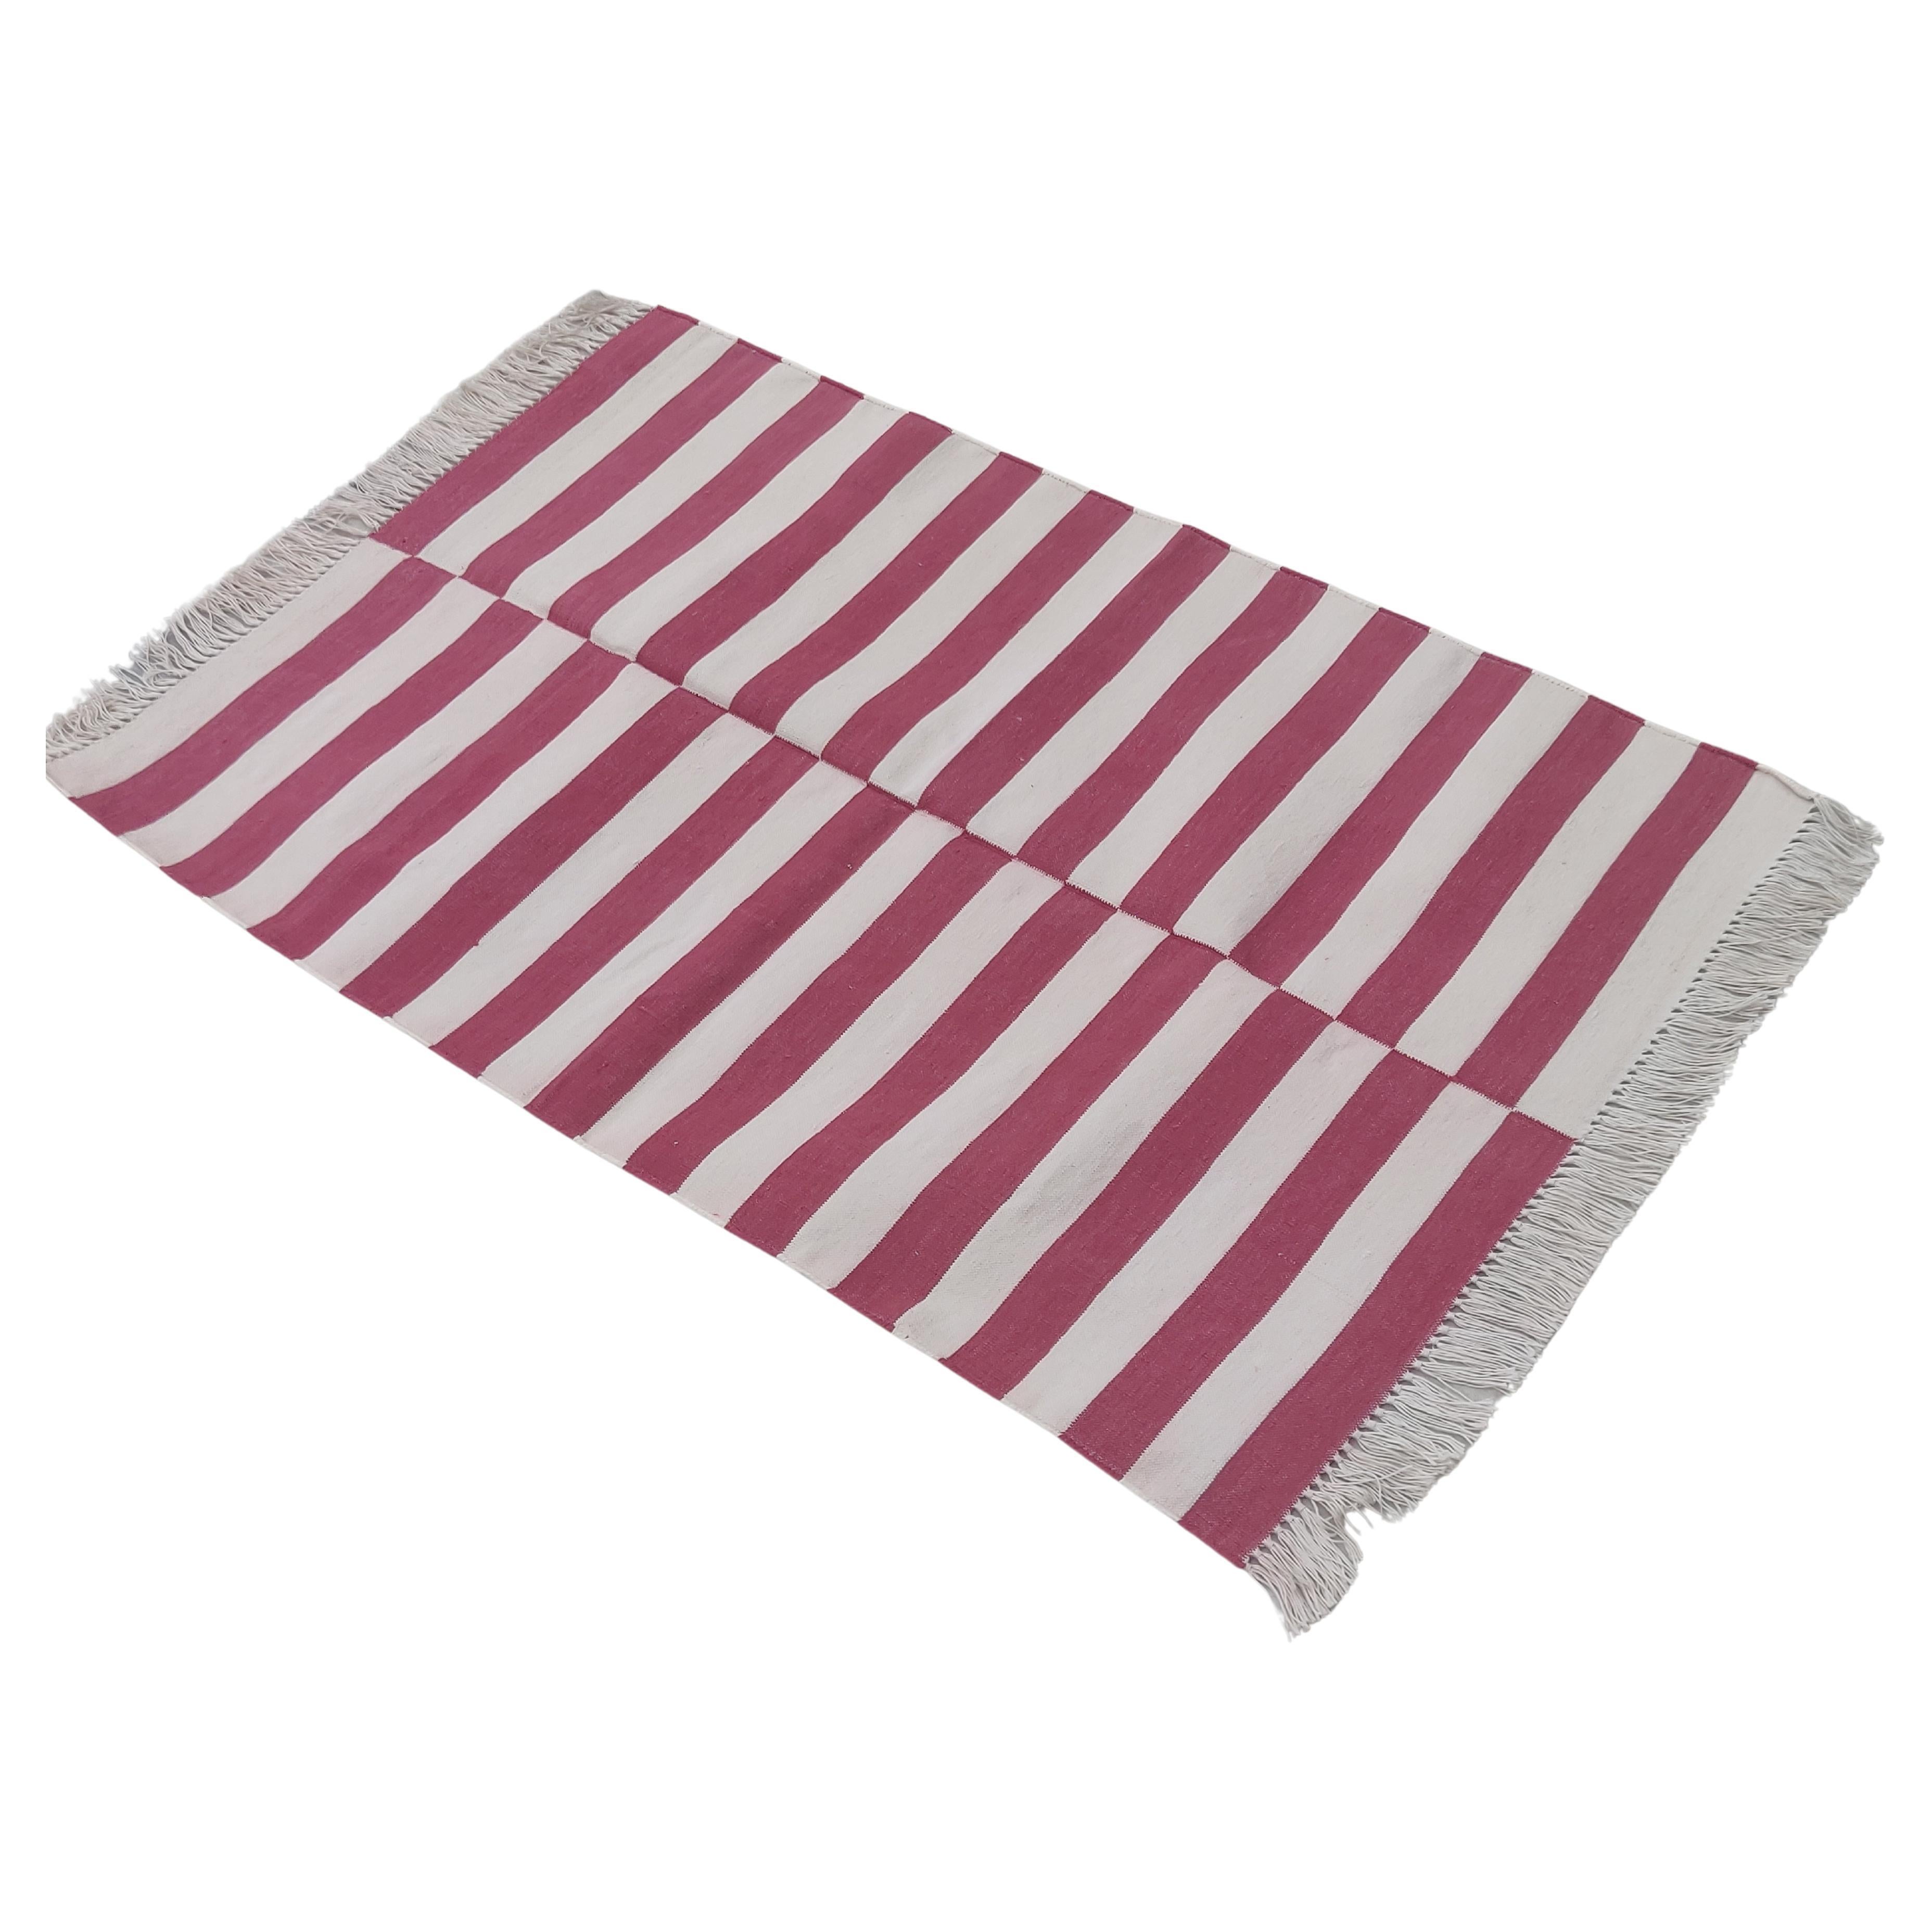 Handmade Cotton Area Flat Weave Rug, 2.5x4 Pink And White Striped Indian Dhurrie For Sale